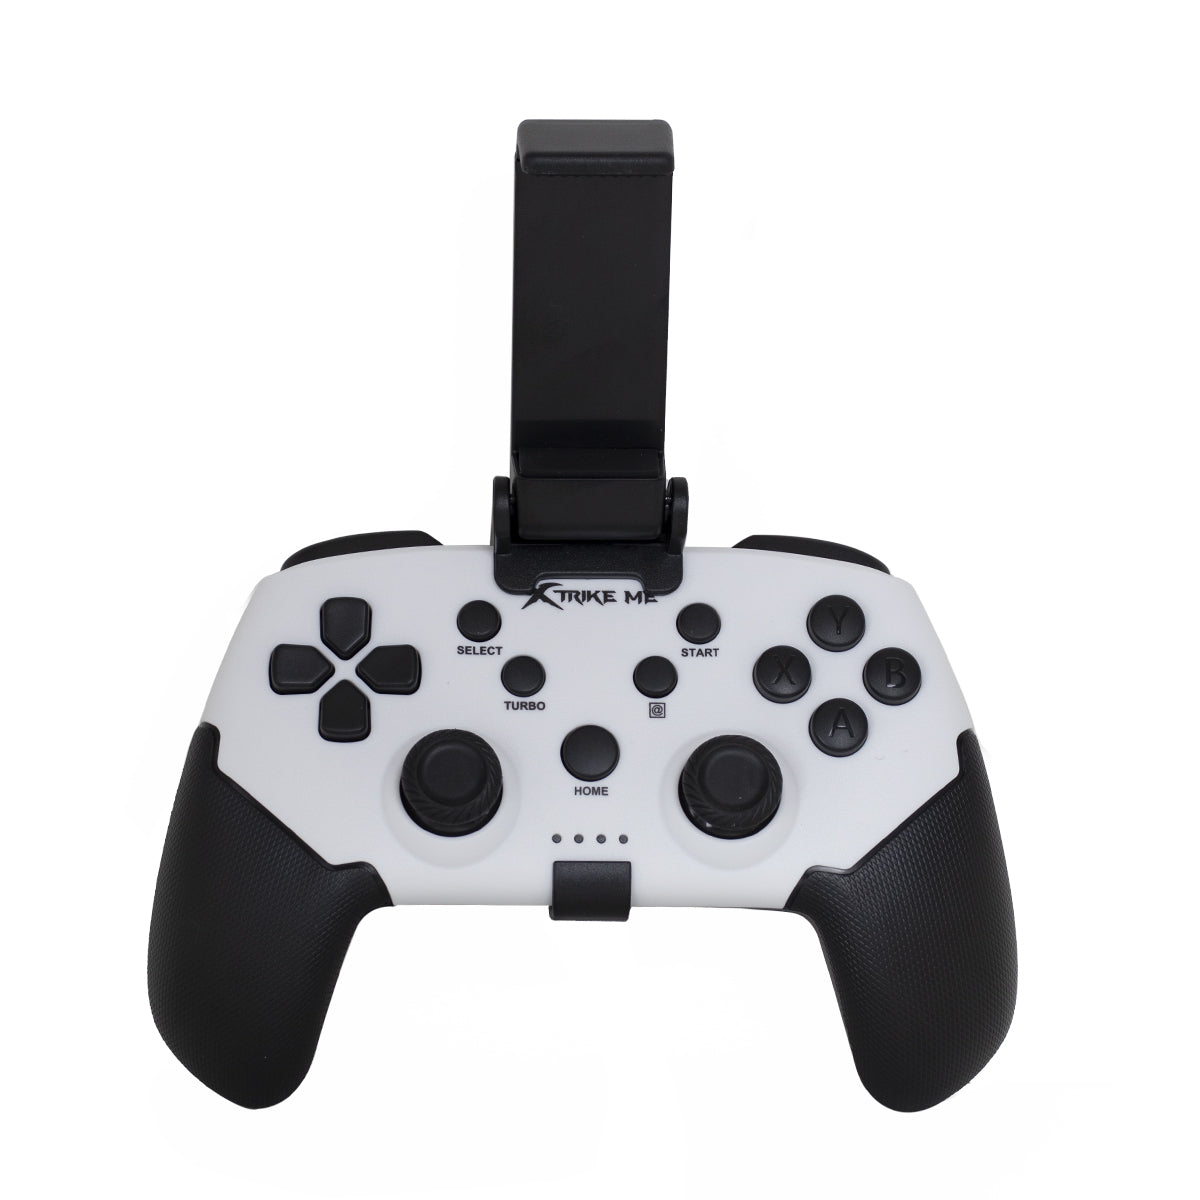 Joystick Inalambrico Wireless Ps4 Ps3 Switch Android iPhone